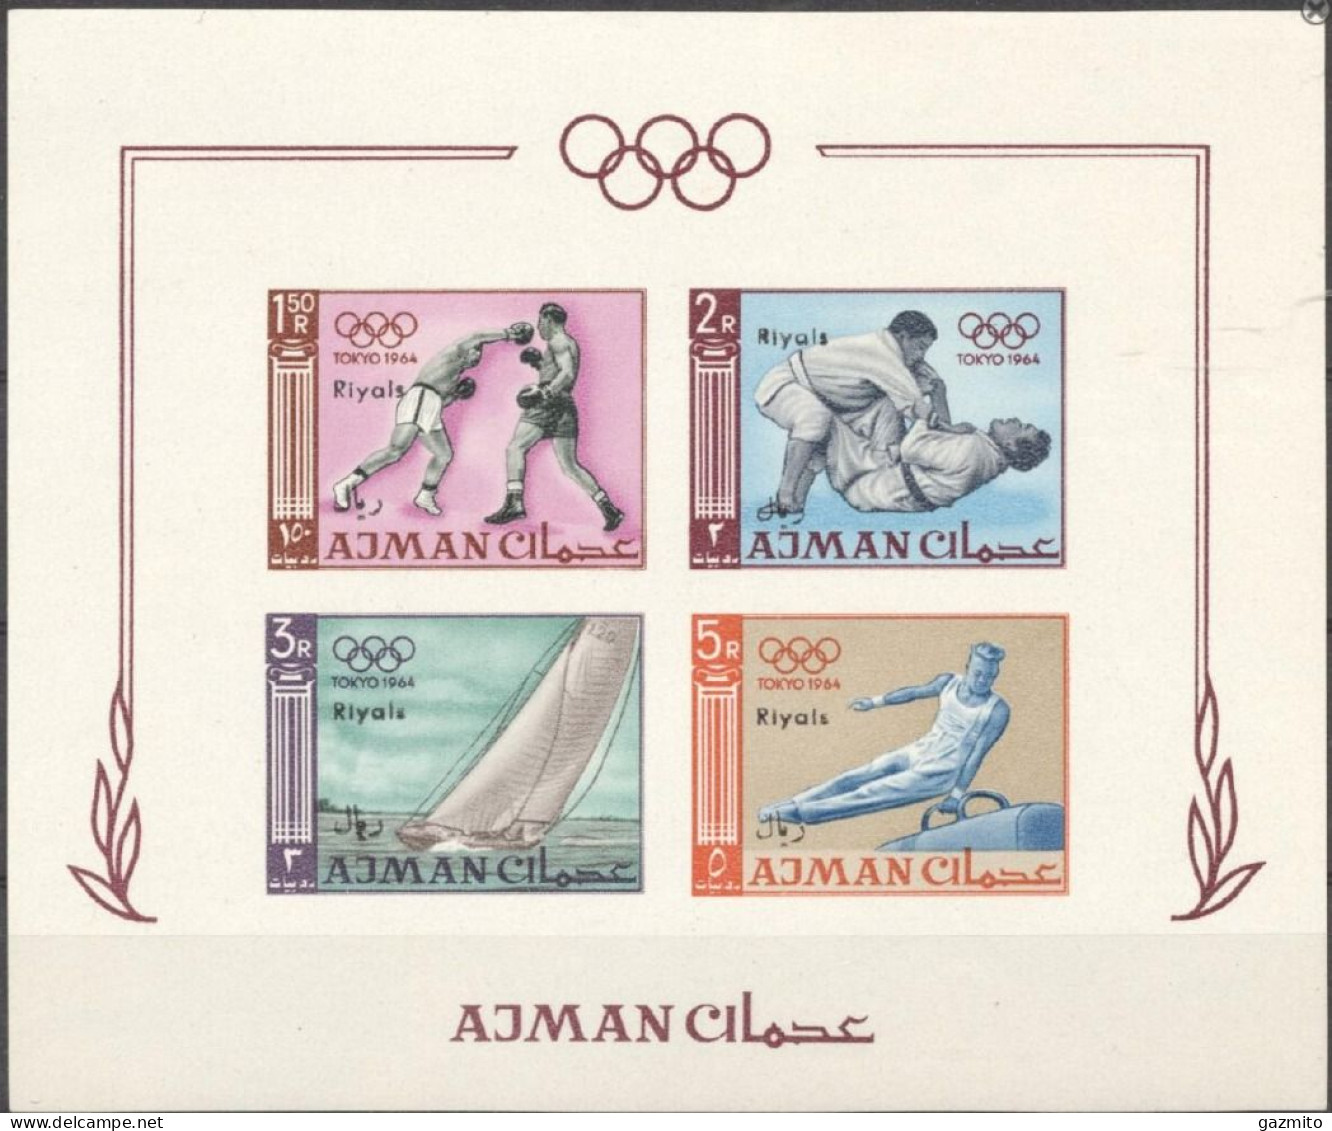 Ajman 1967, Olympic Games In Tokio, Judo, Boxing, Shipping, Gymnastic, 4val In BF IMPERFORATED - Ete 1964: Tokyo